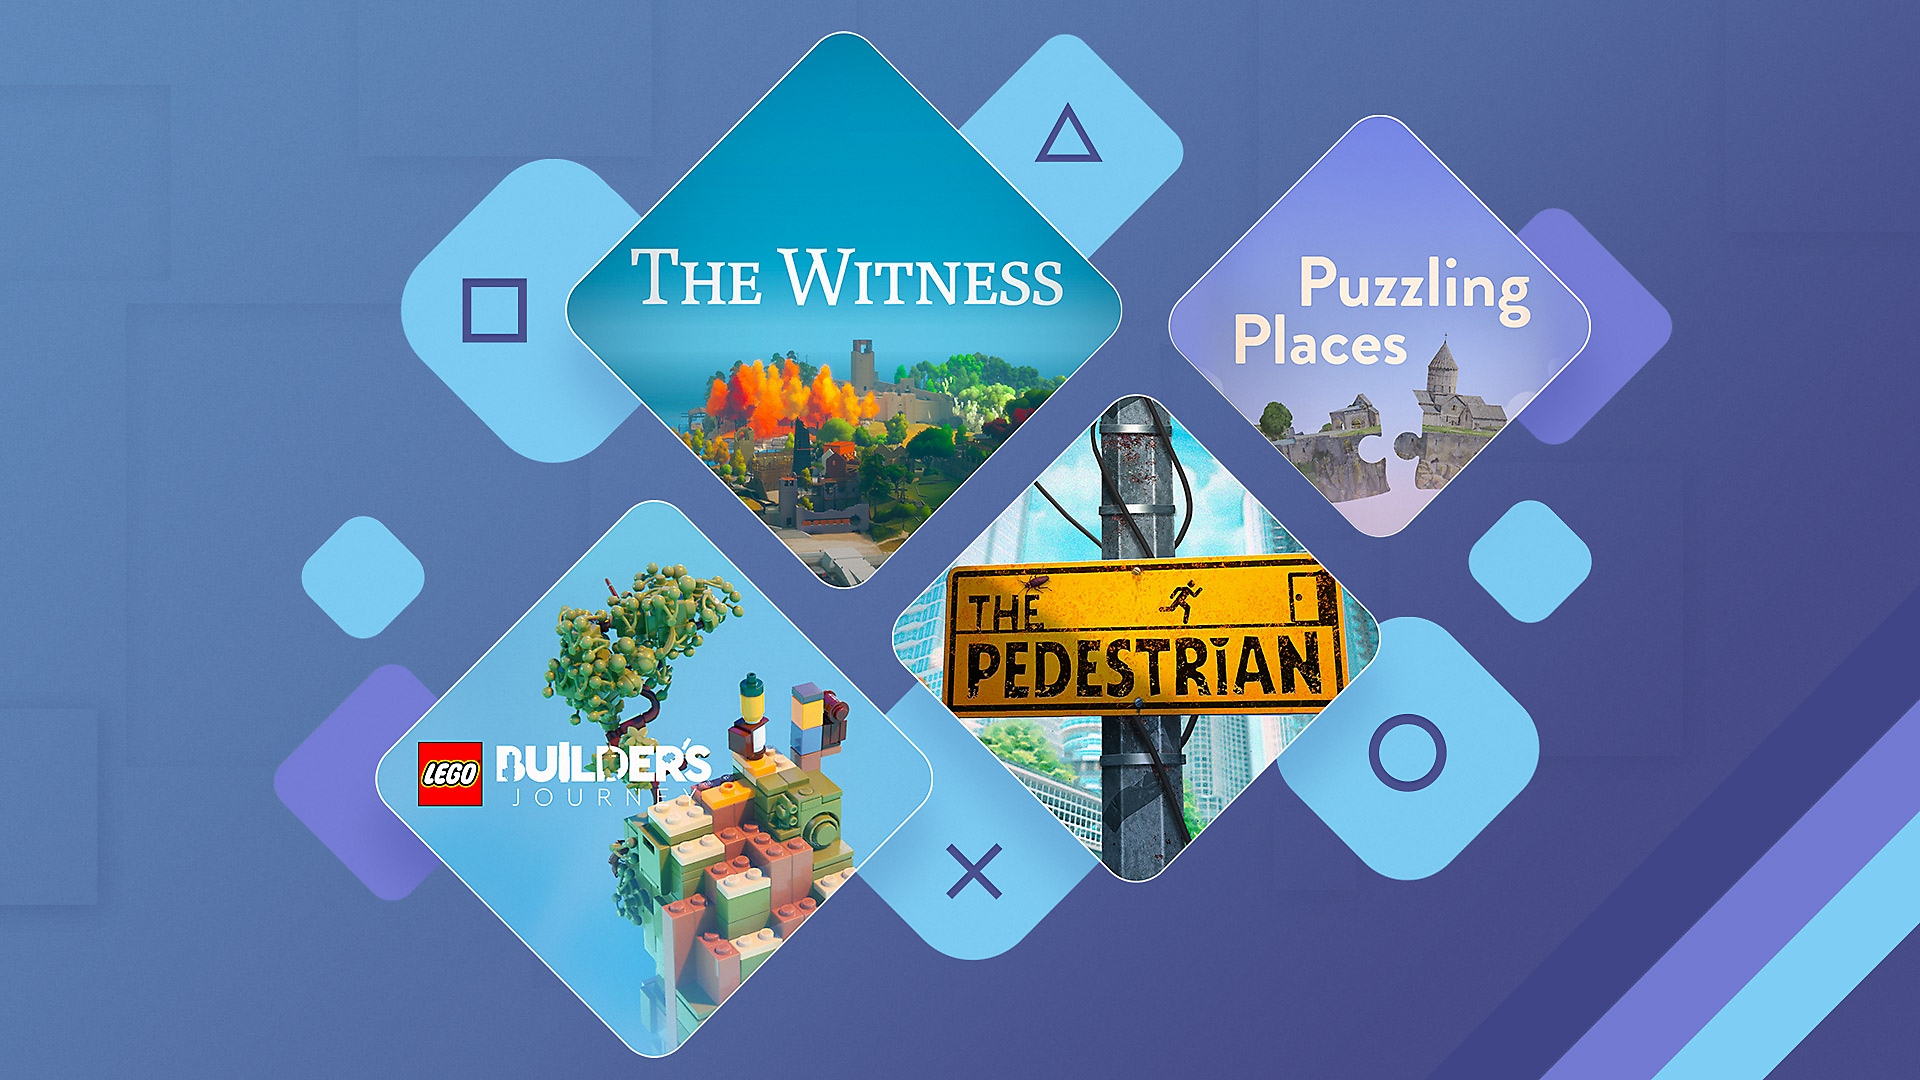 Best puzzle games on PS4 and PS5 promotional lock up featuring The Witness, The Pedestrian, Ghost Giant and LEGO Builder's Journey.